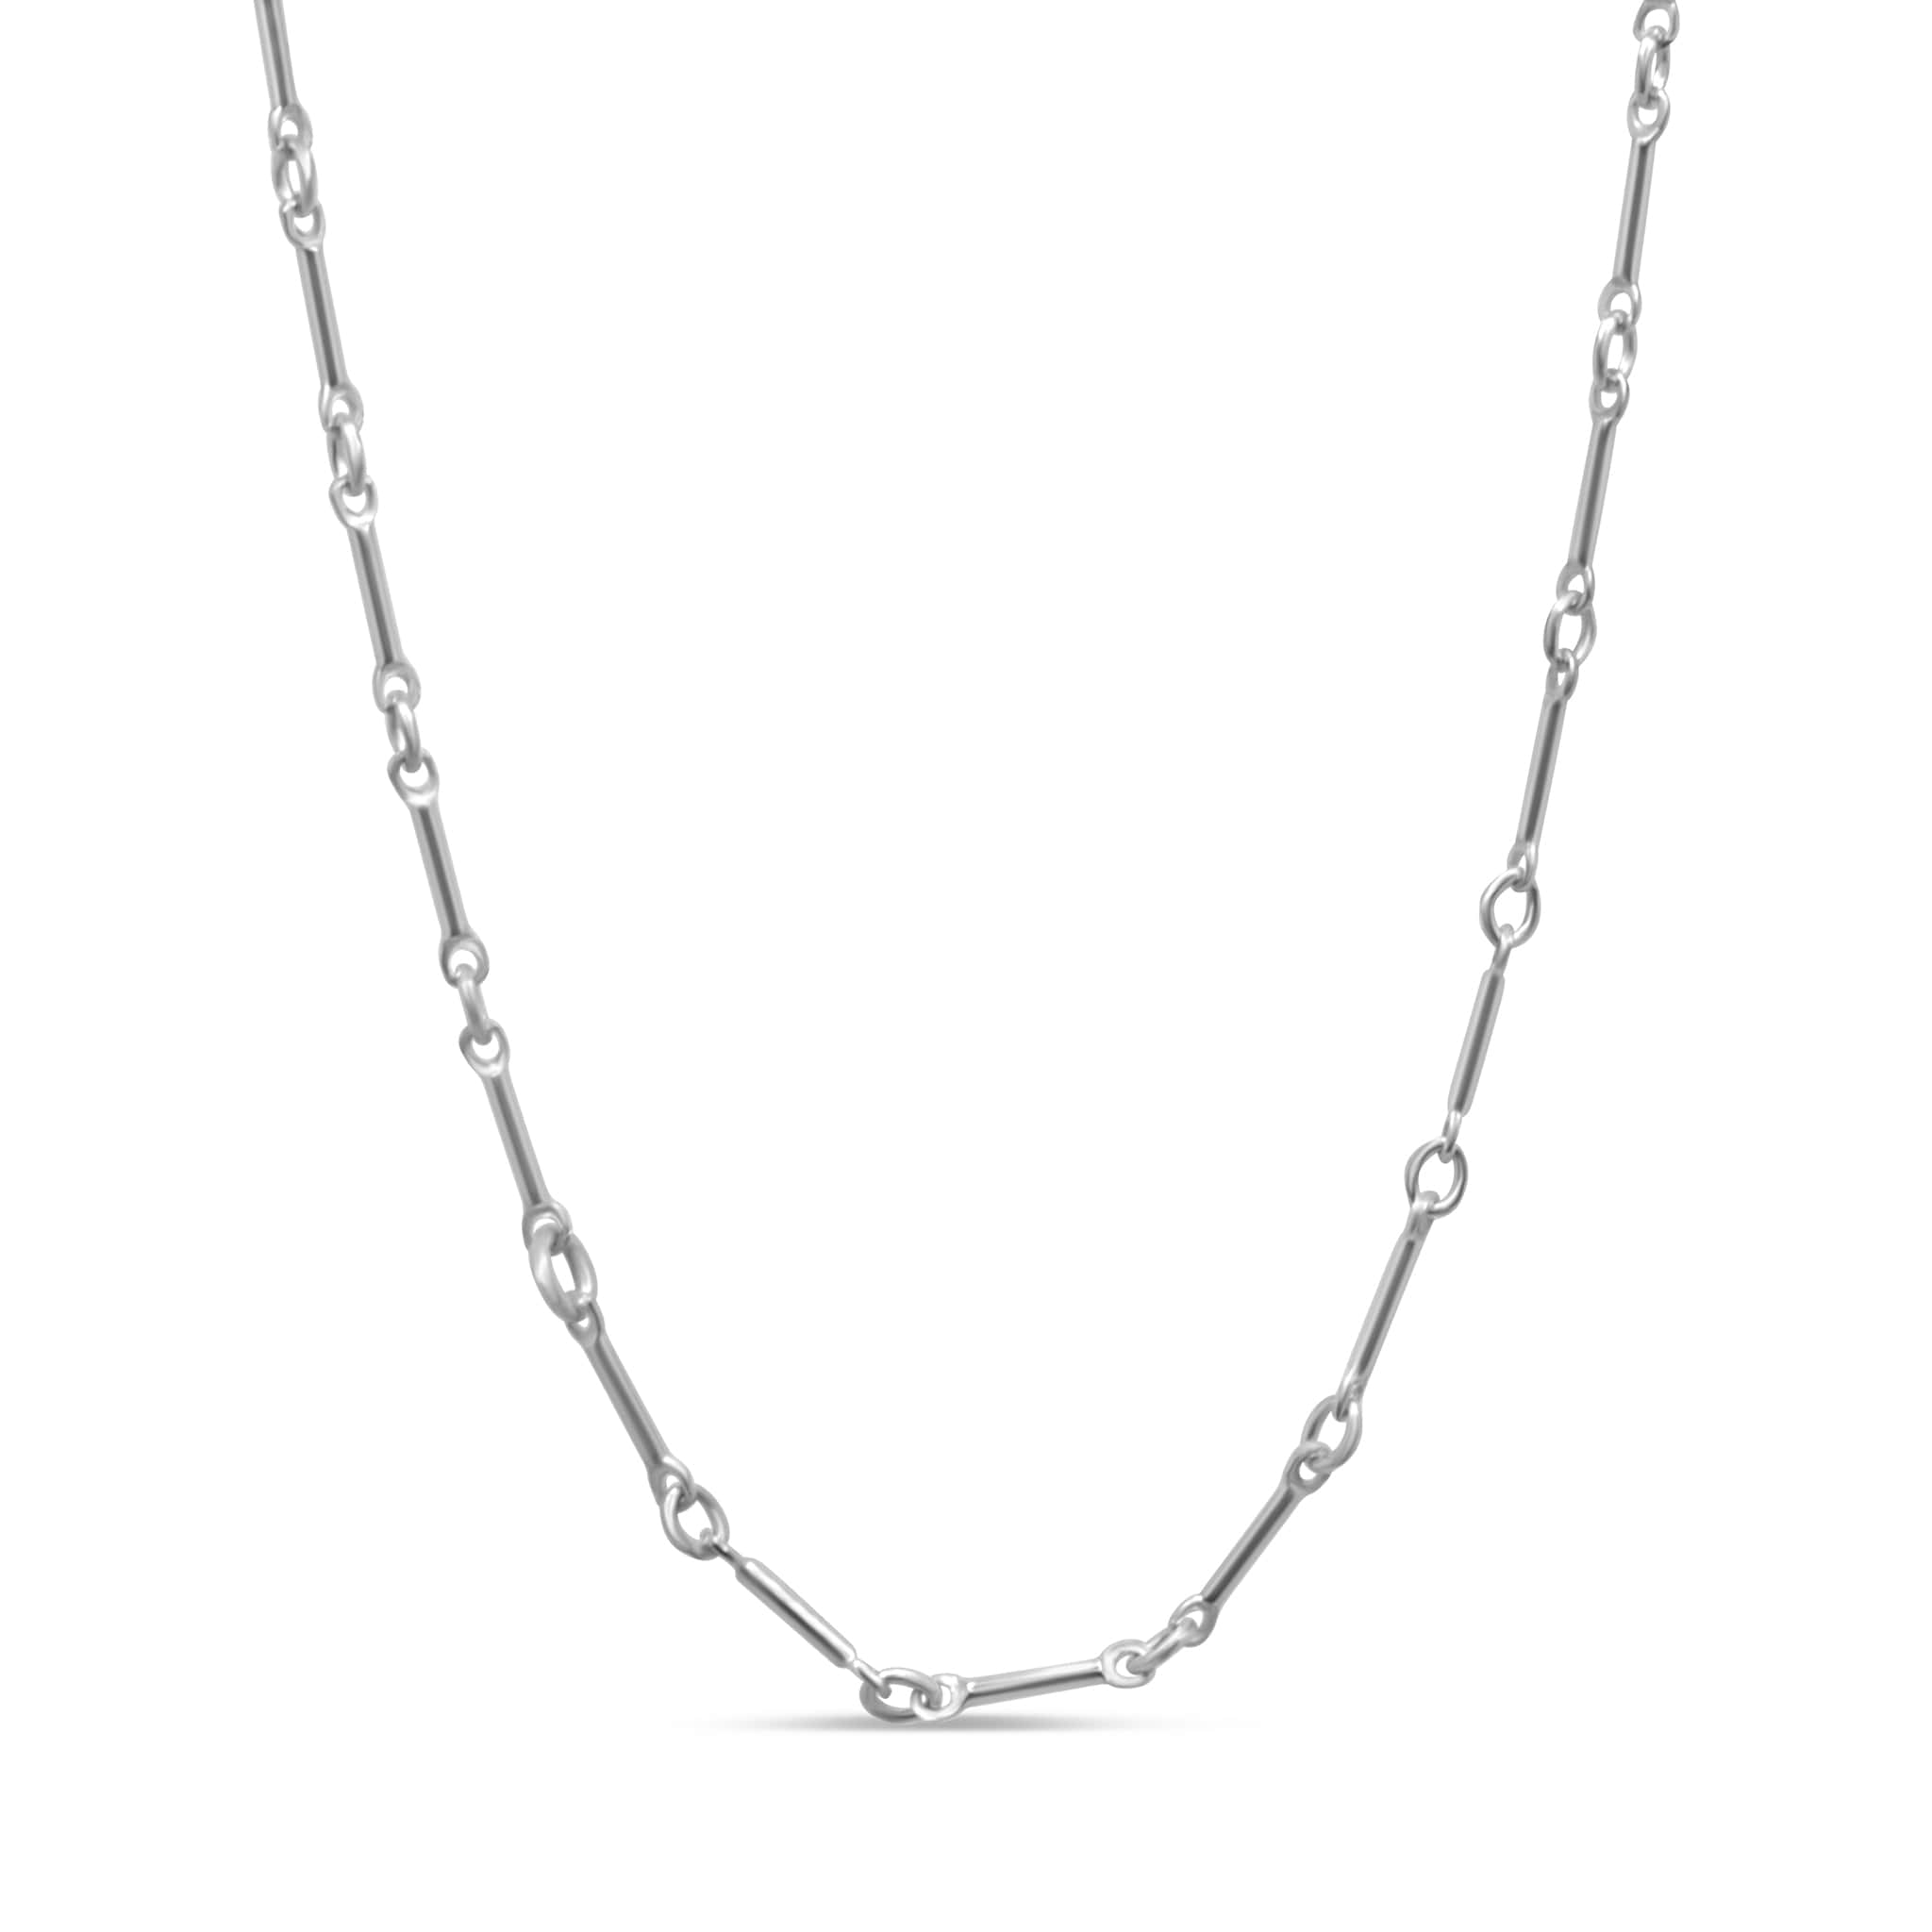 Sterling silver bar link long necklace